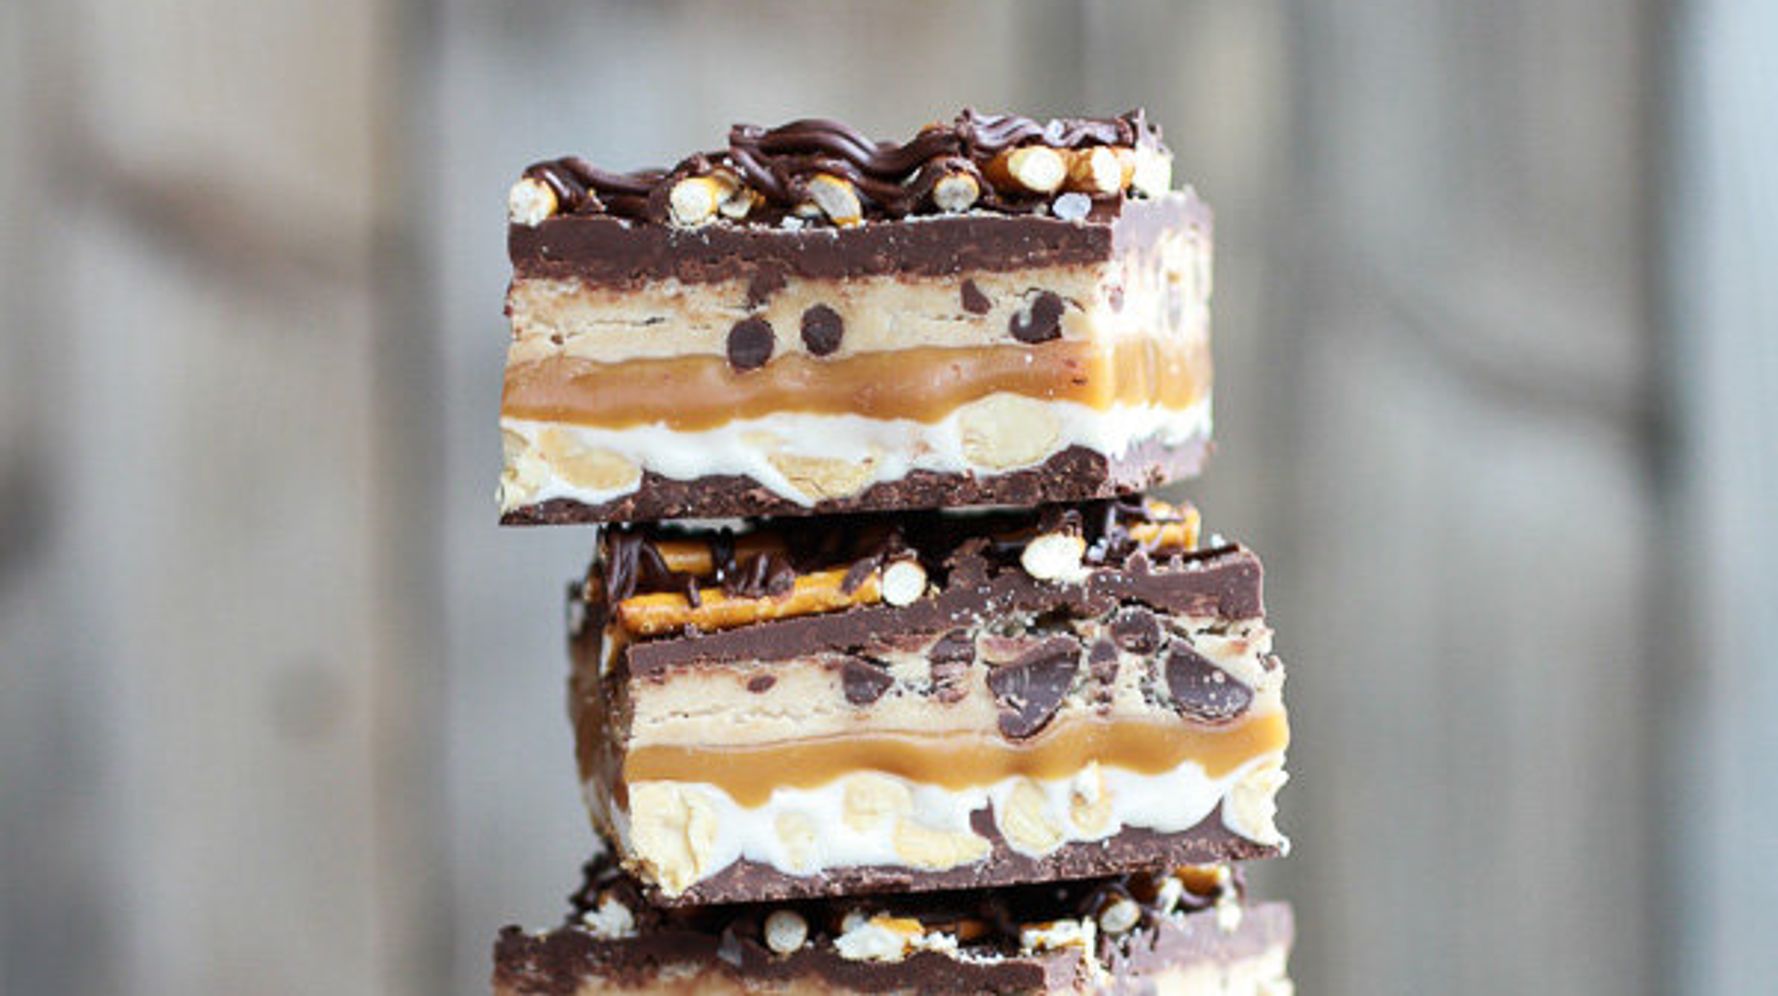 Dessert Bar Recipes That Are Way Better Than Brownies | HuffPost Life